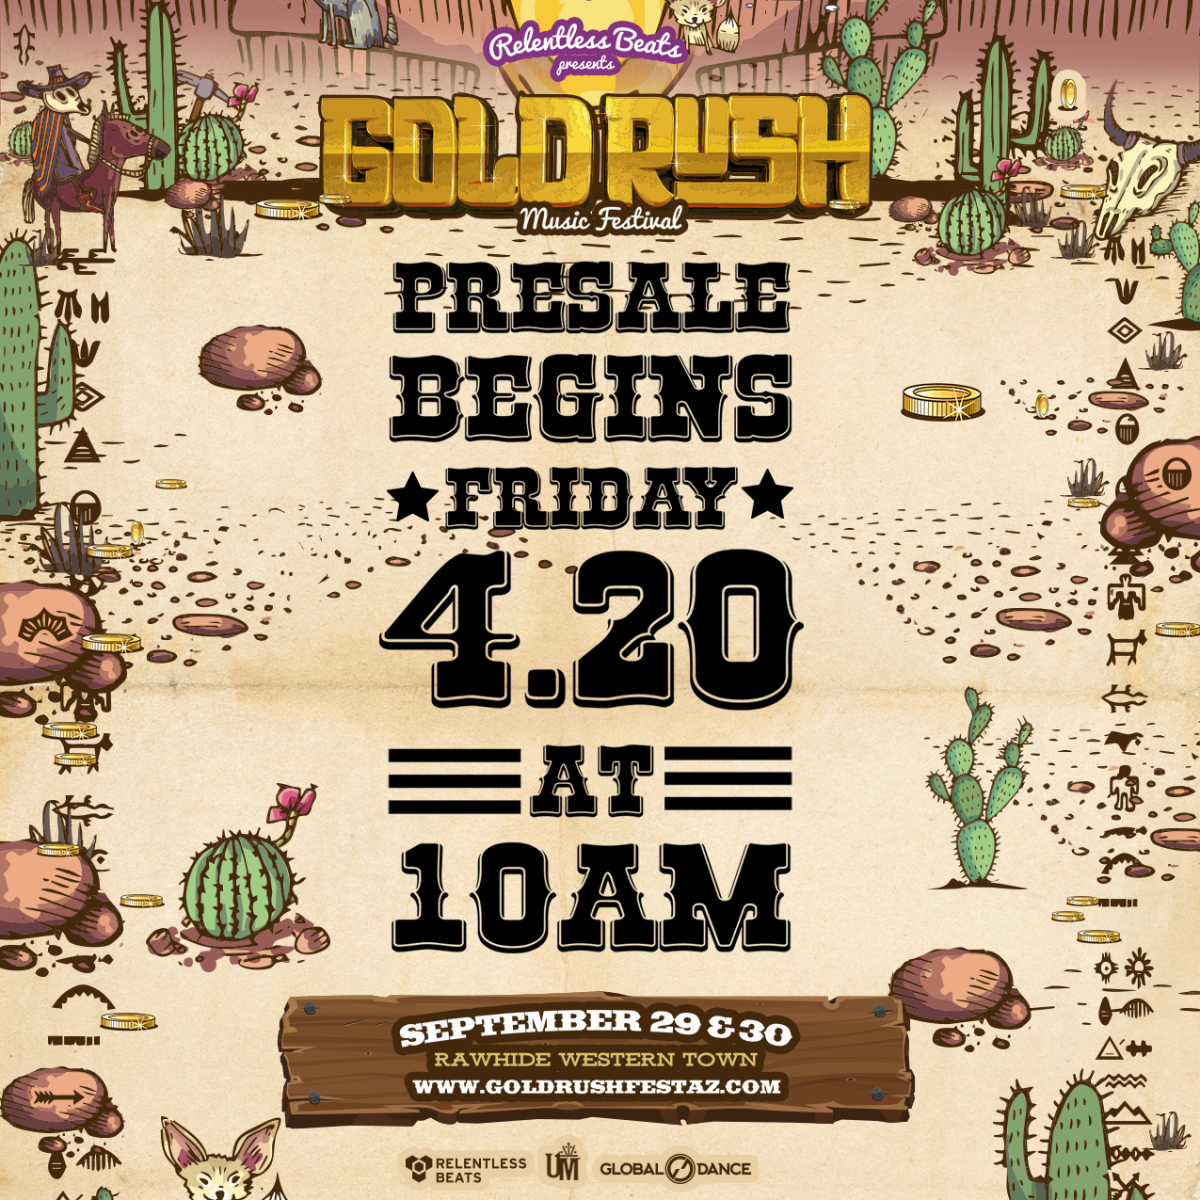 Relentless Beats Announces the Return of Goldrush Music Festival, with New Dates – this September 29 & 30